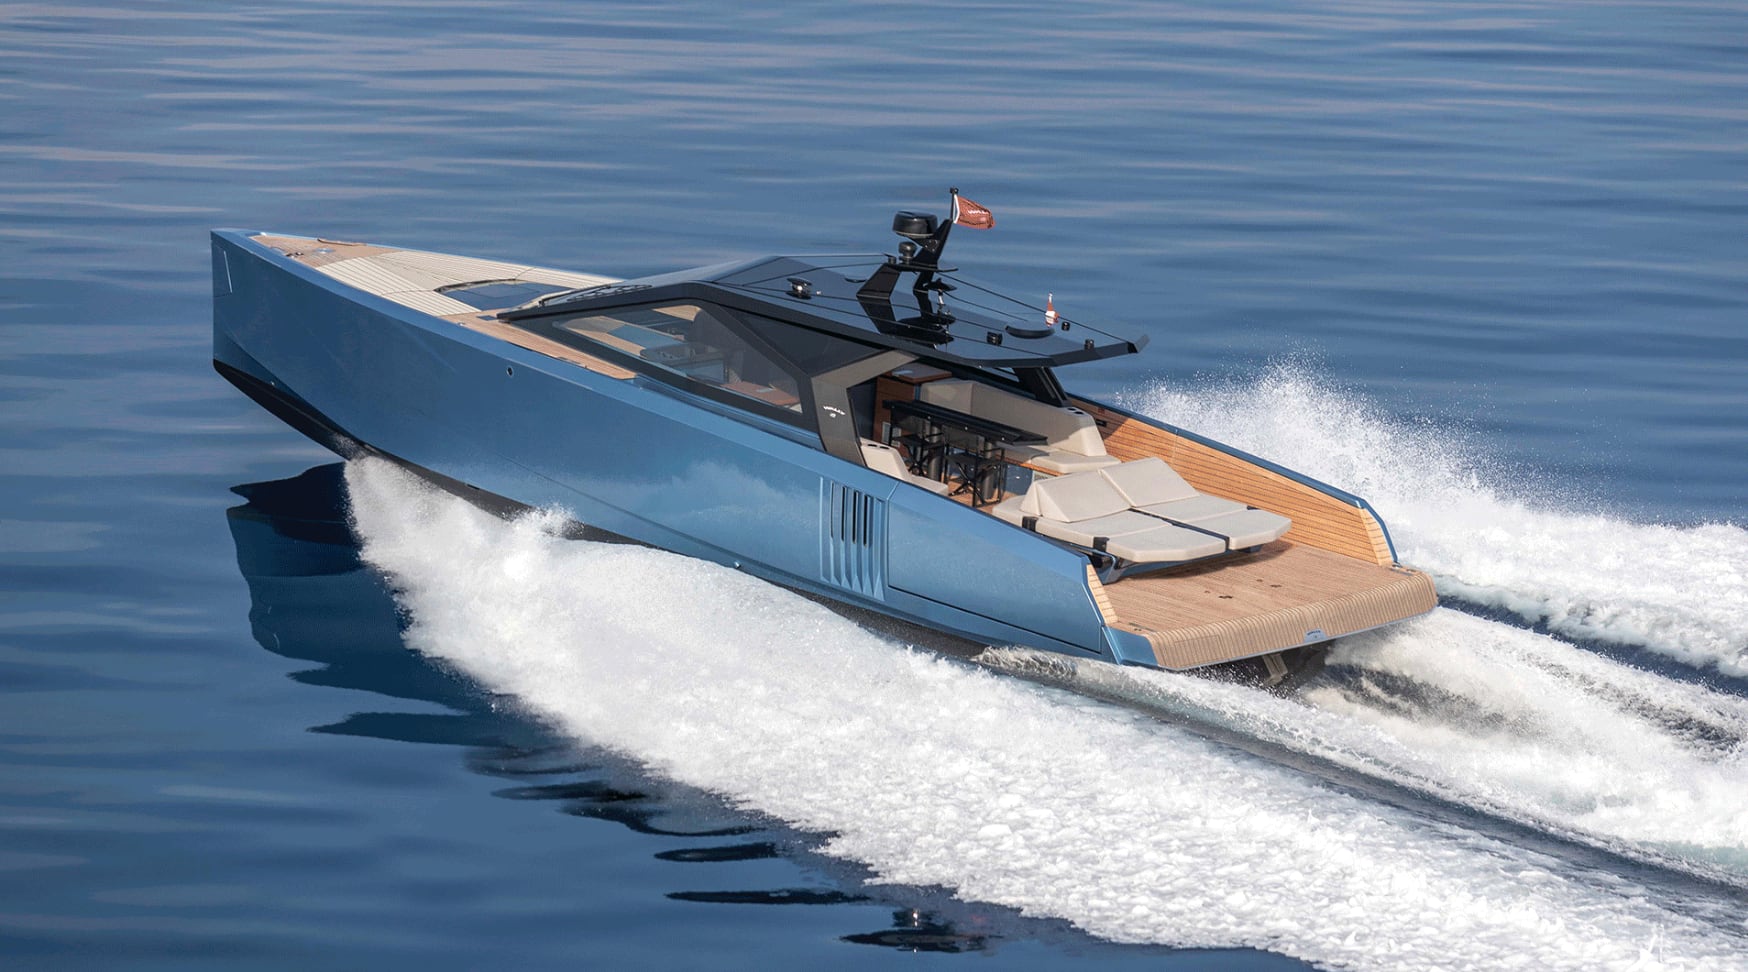 FERRETTI GROUP INNOVATION AT THE SINGAPORE YACHTING FESTIVAL WITH TWO WALLY APAC PREMIERES